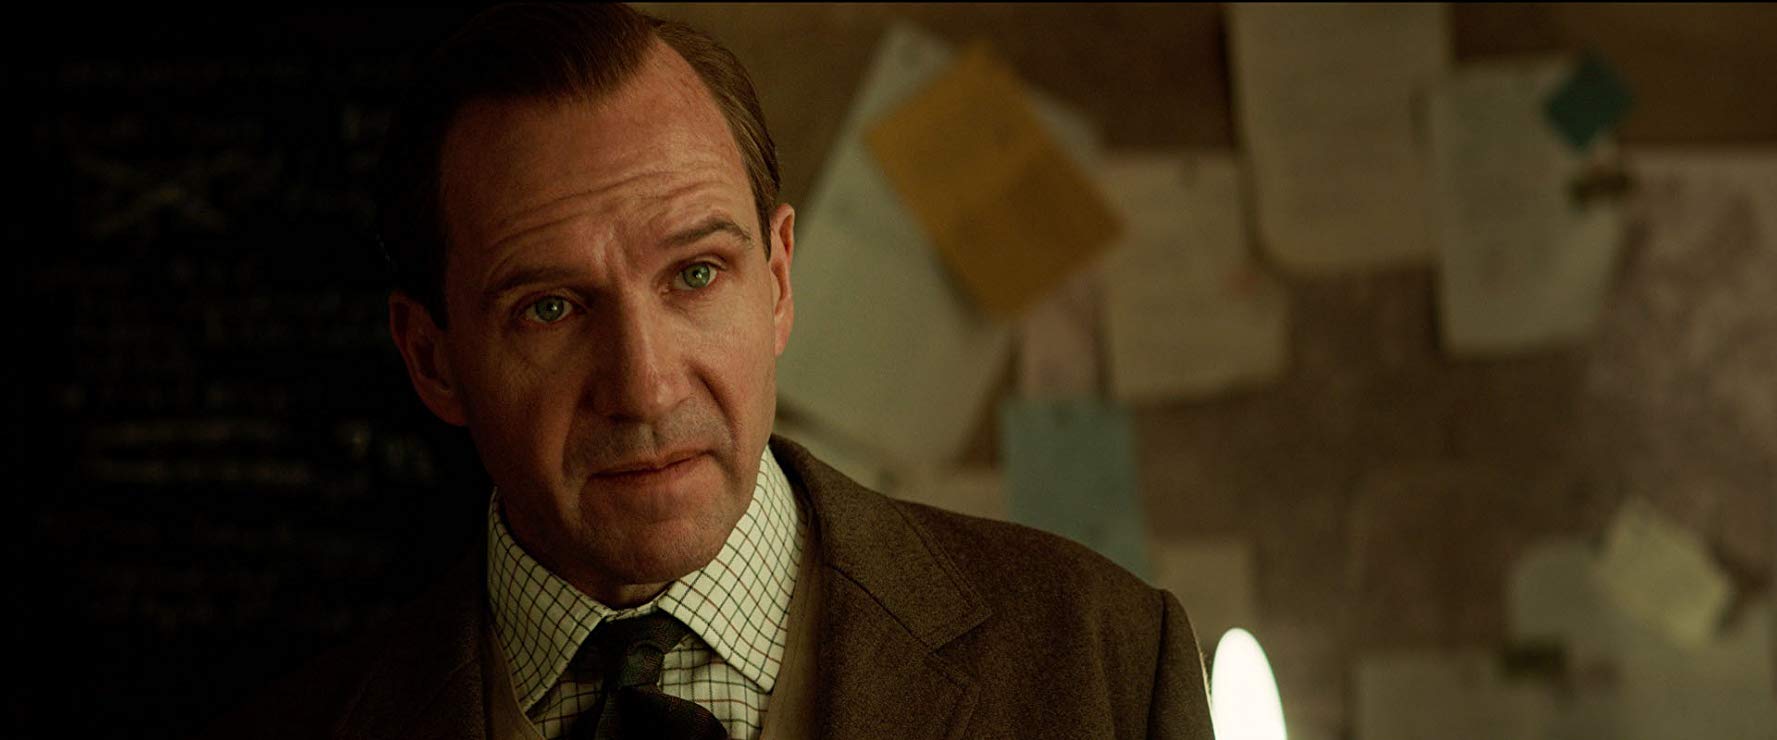 Ralph Fiennes is seen as the Duke of Oxford in a still image from “The King’s Man”.